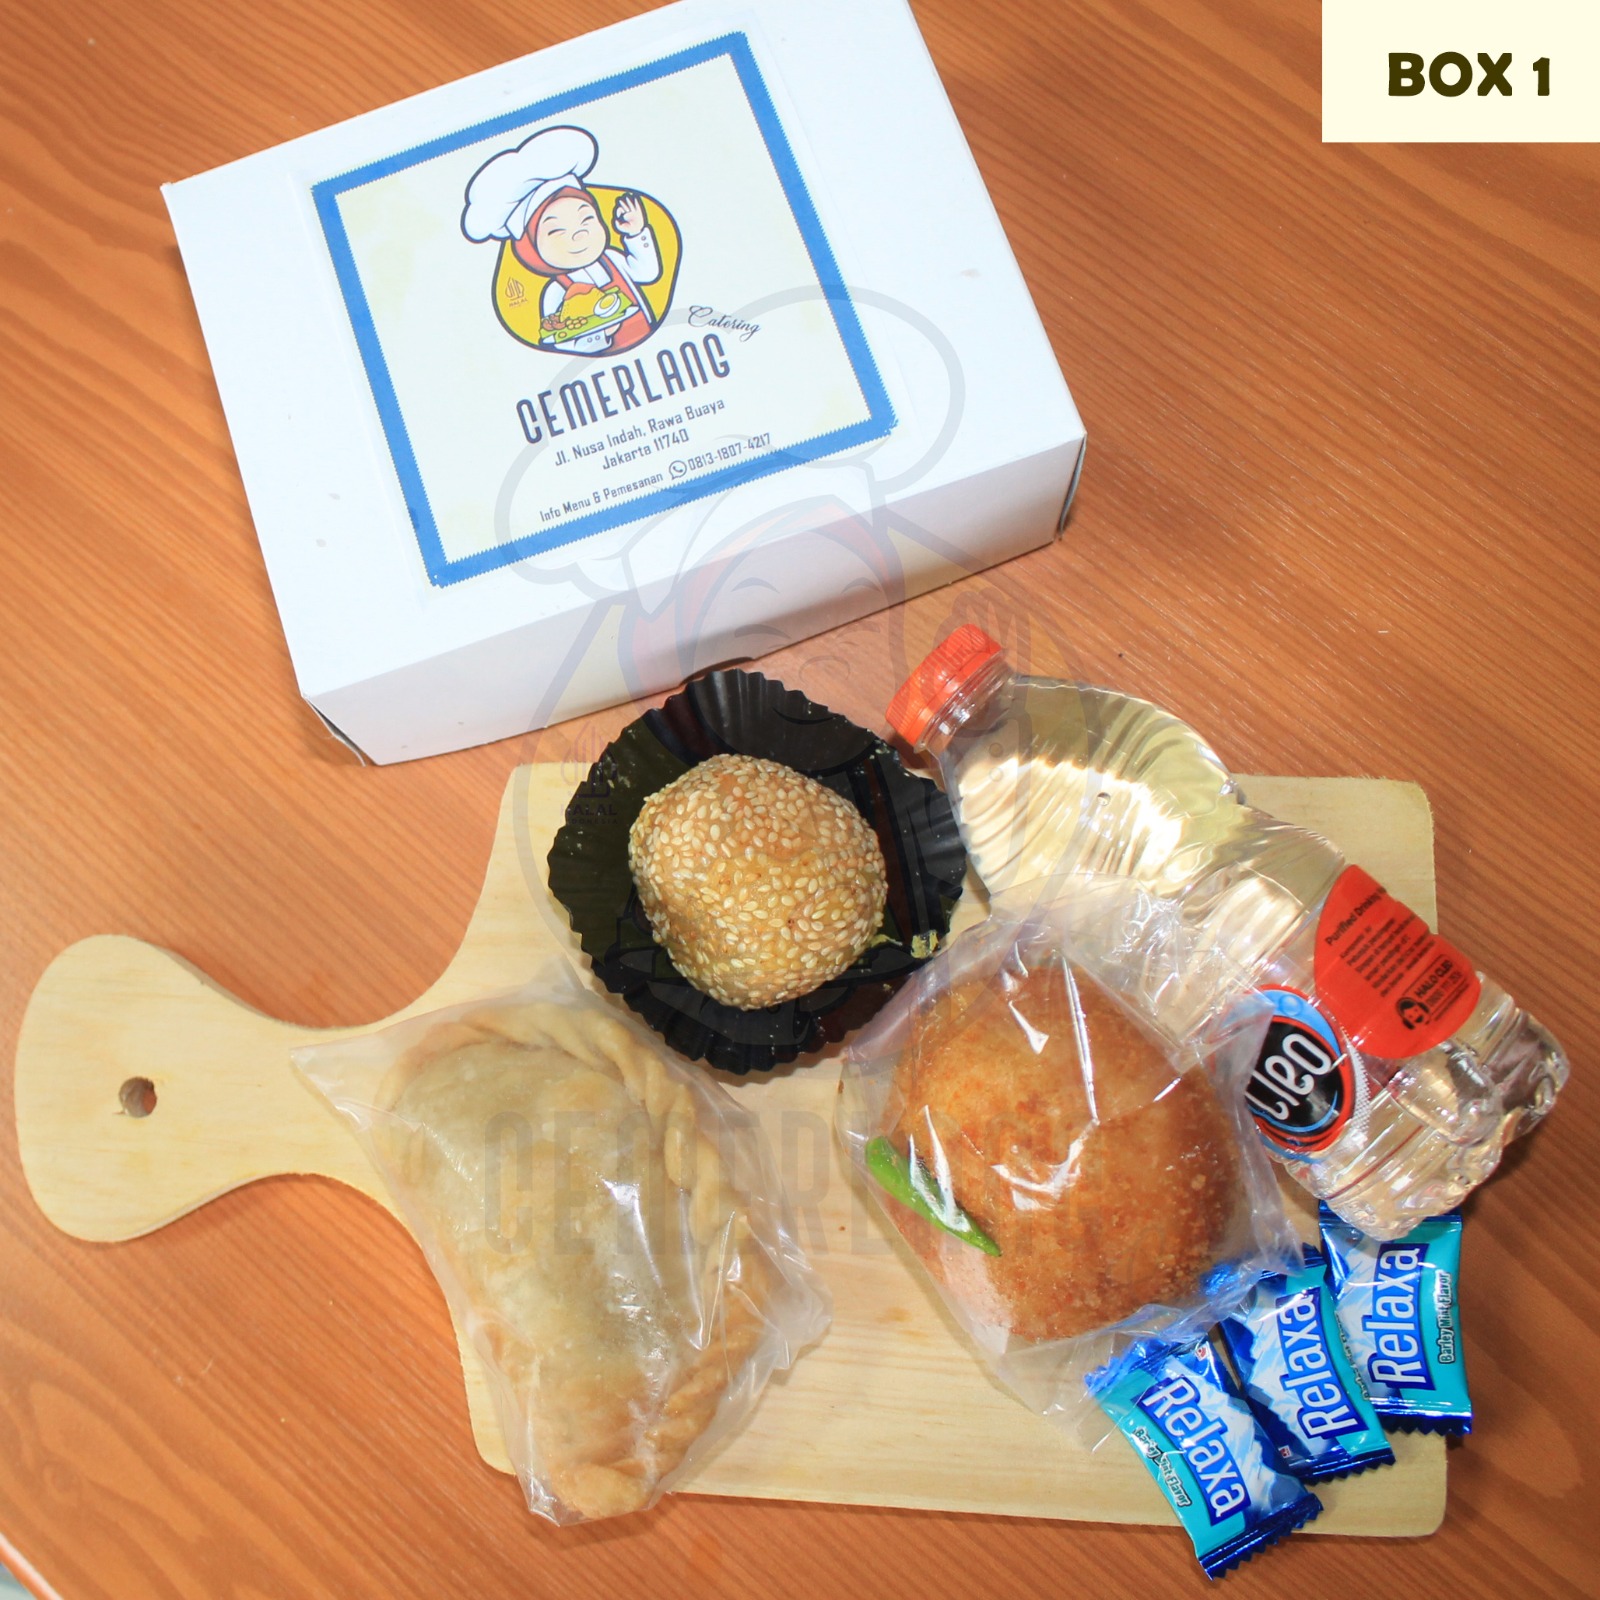 Paket Snack Box Catering Cemerlang